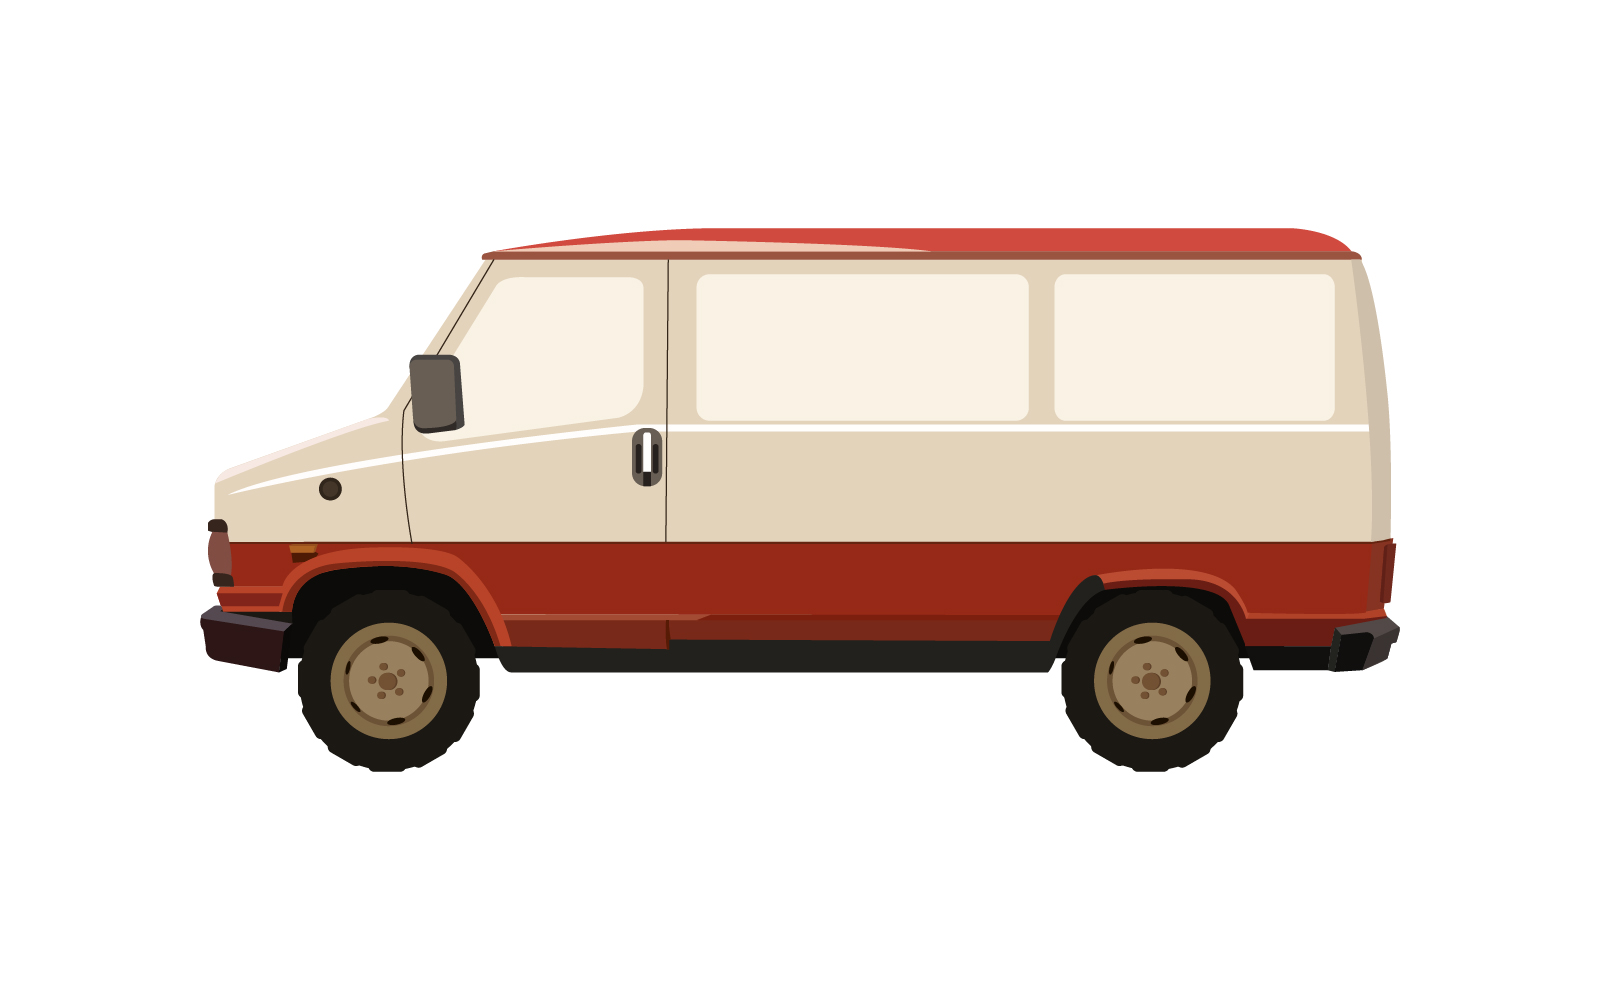 Van illustrated and colored on background in vector